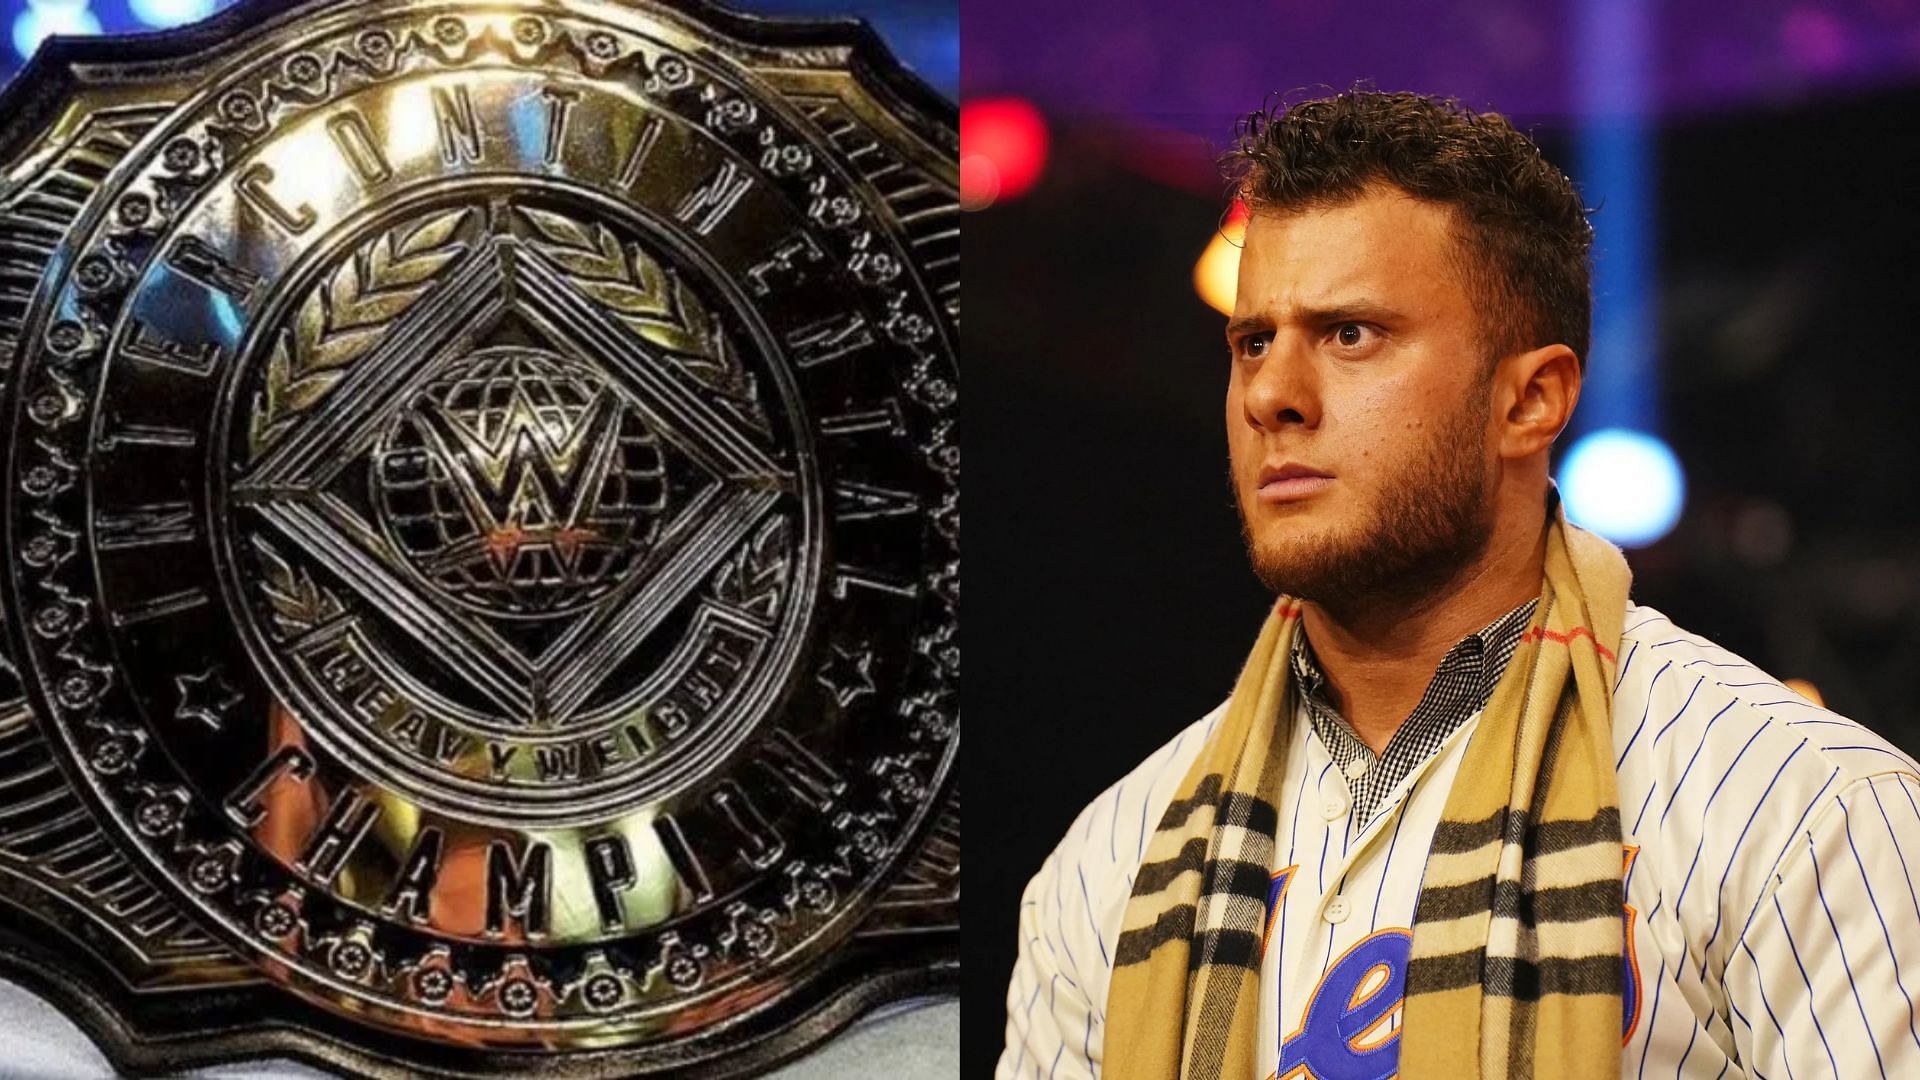 MJF is the current longest-reigning AEW World Champion